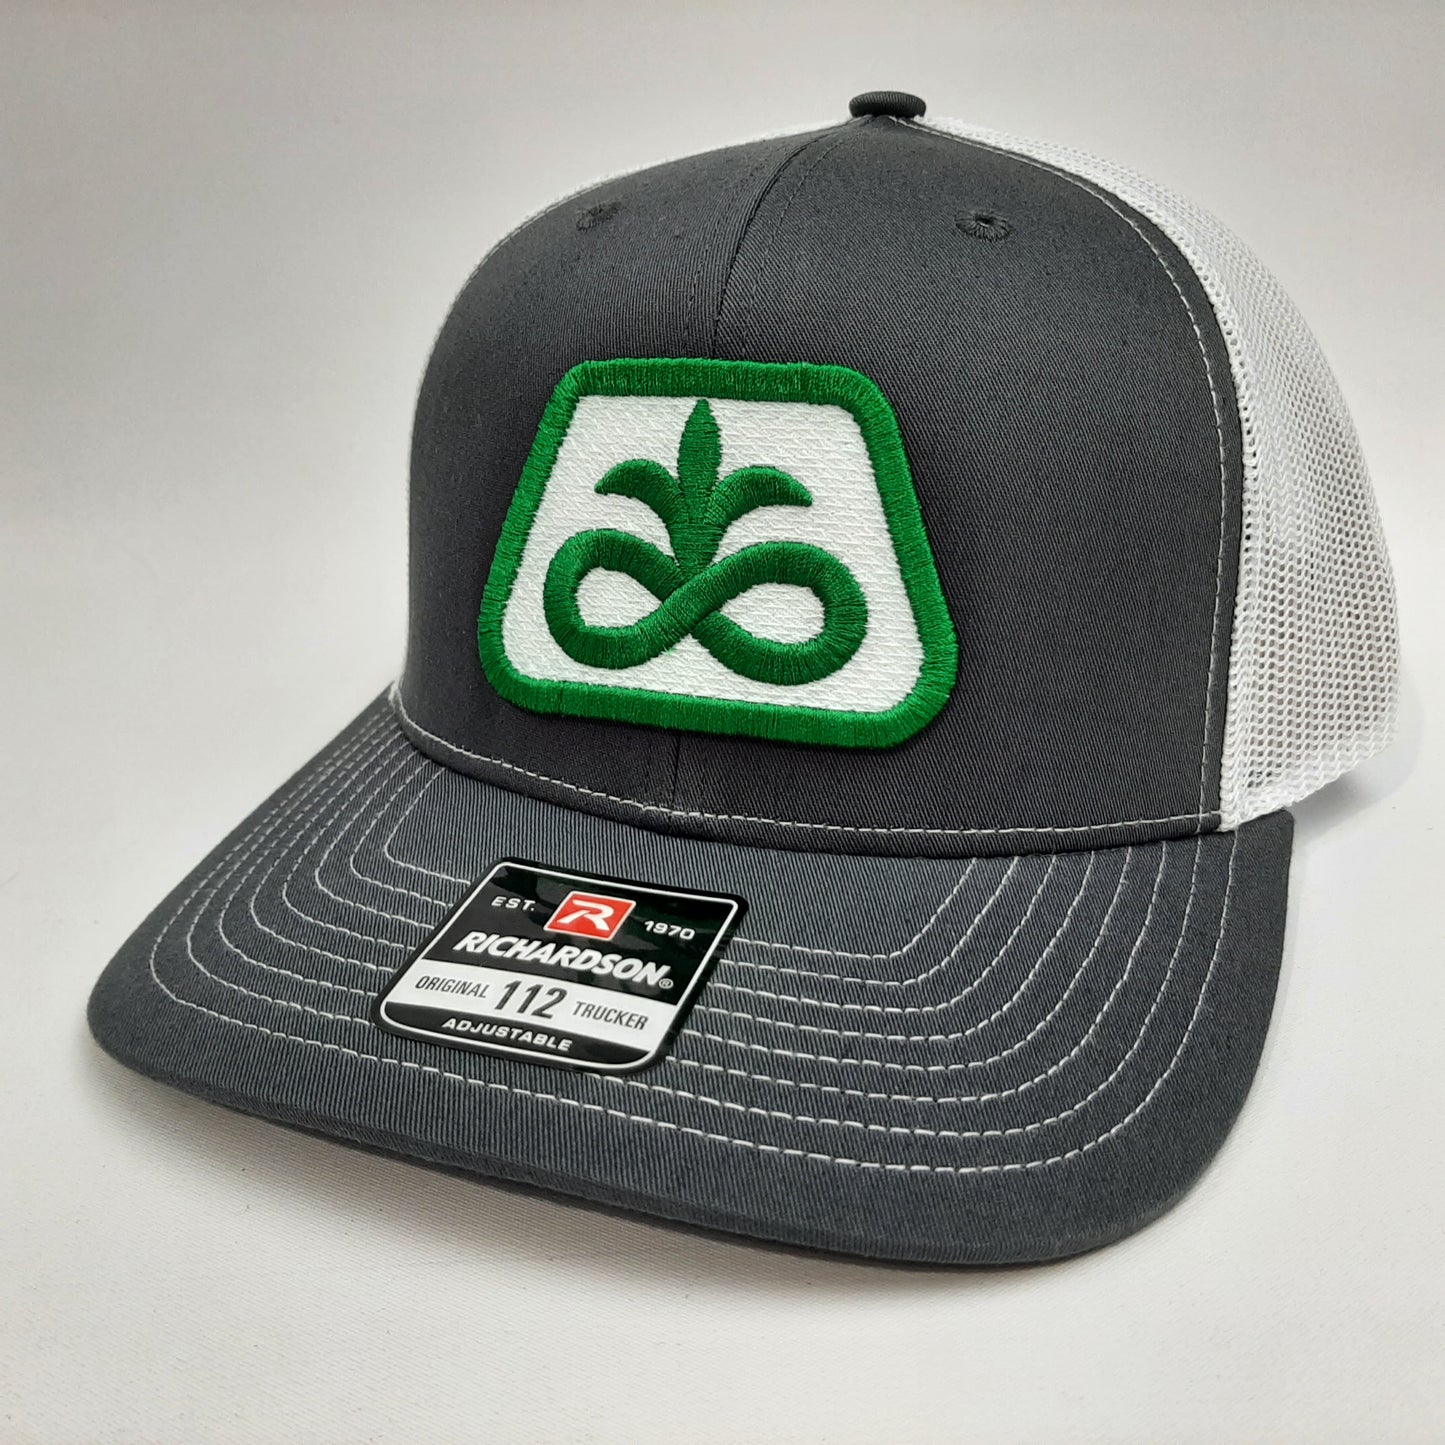 Pioneer Seed Embroidered Patch Richardson 112 Trucker Mesh Snapback Cap Hat